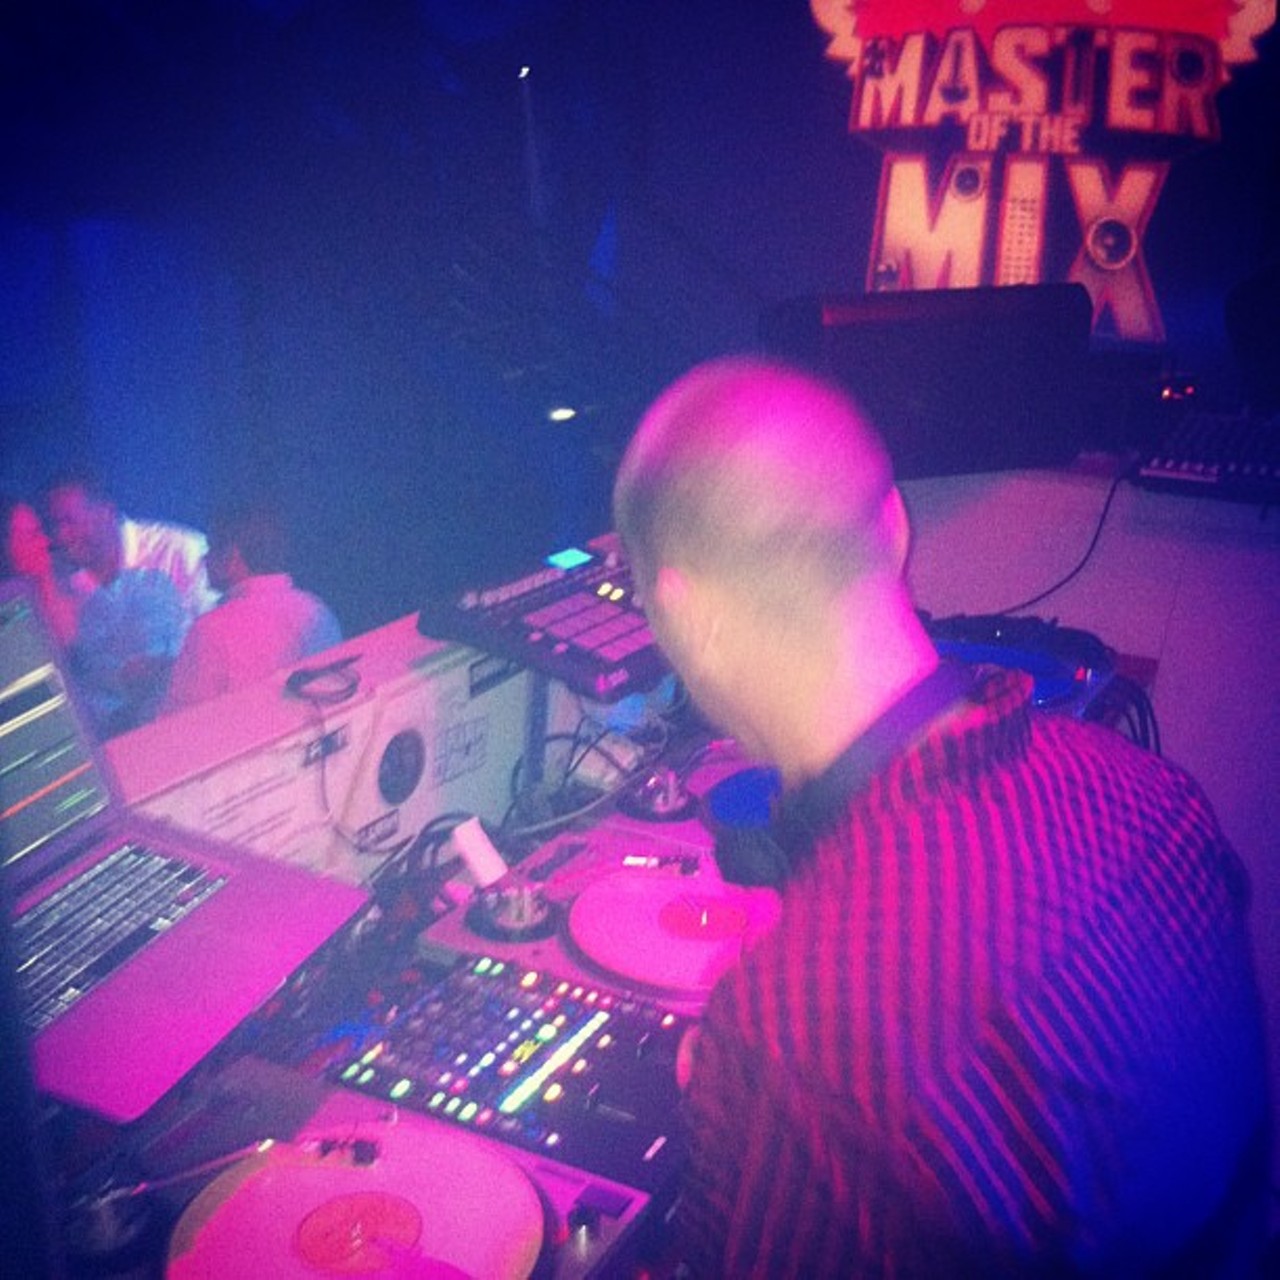 Smirnoff Master of the Mix Party